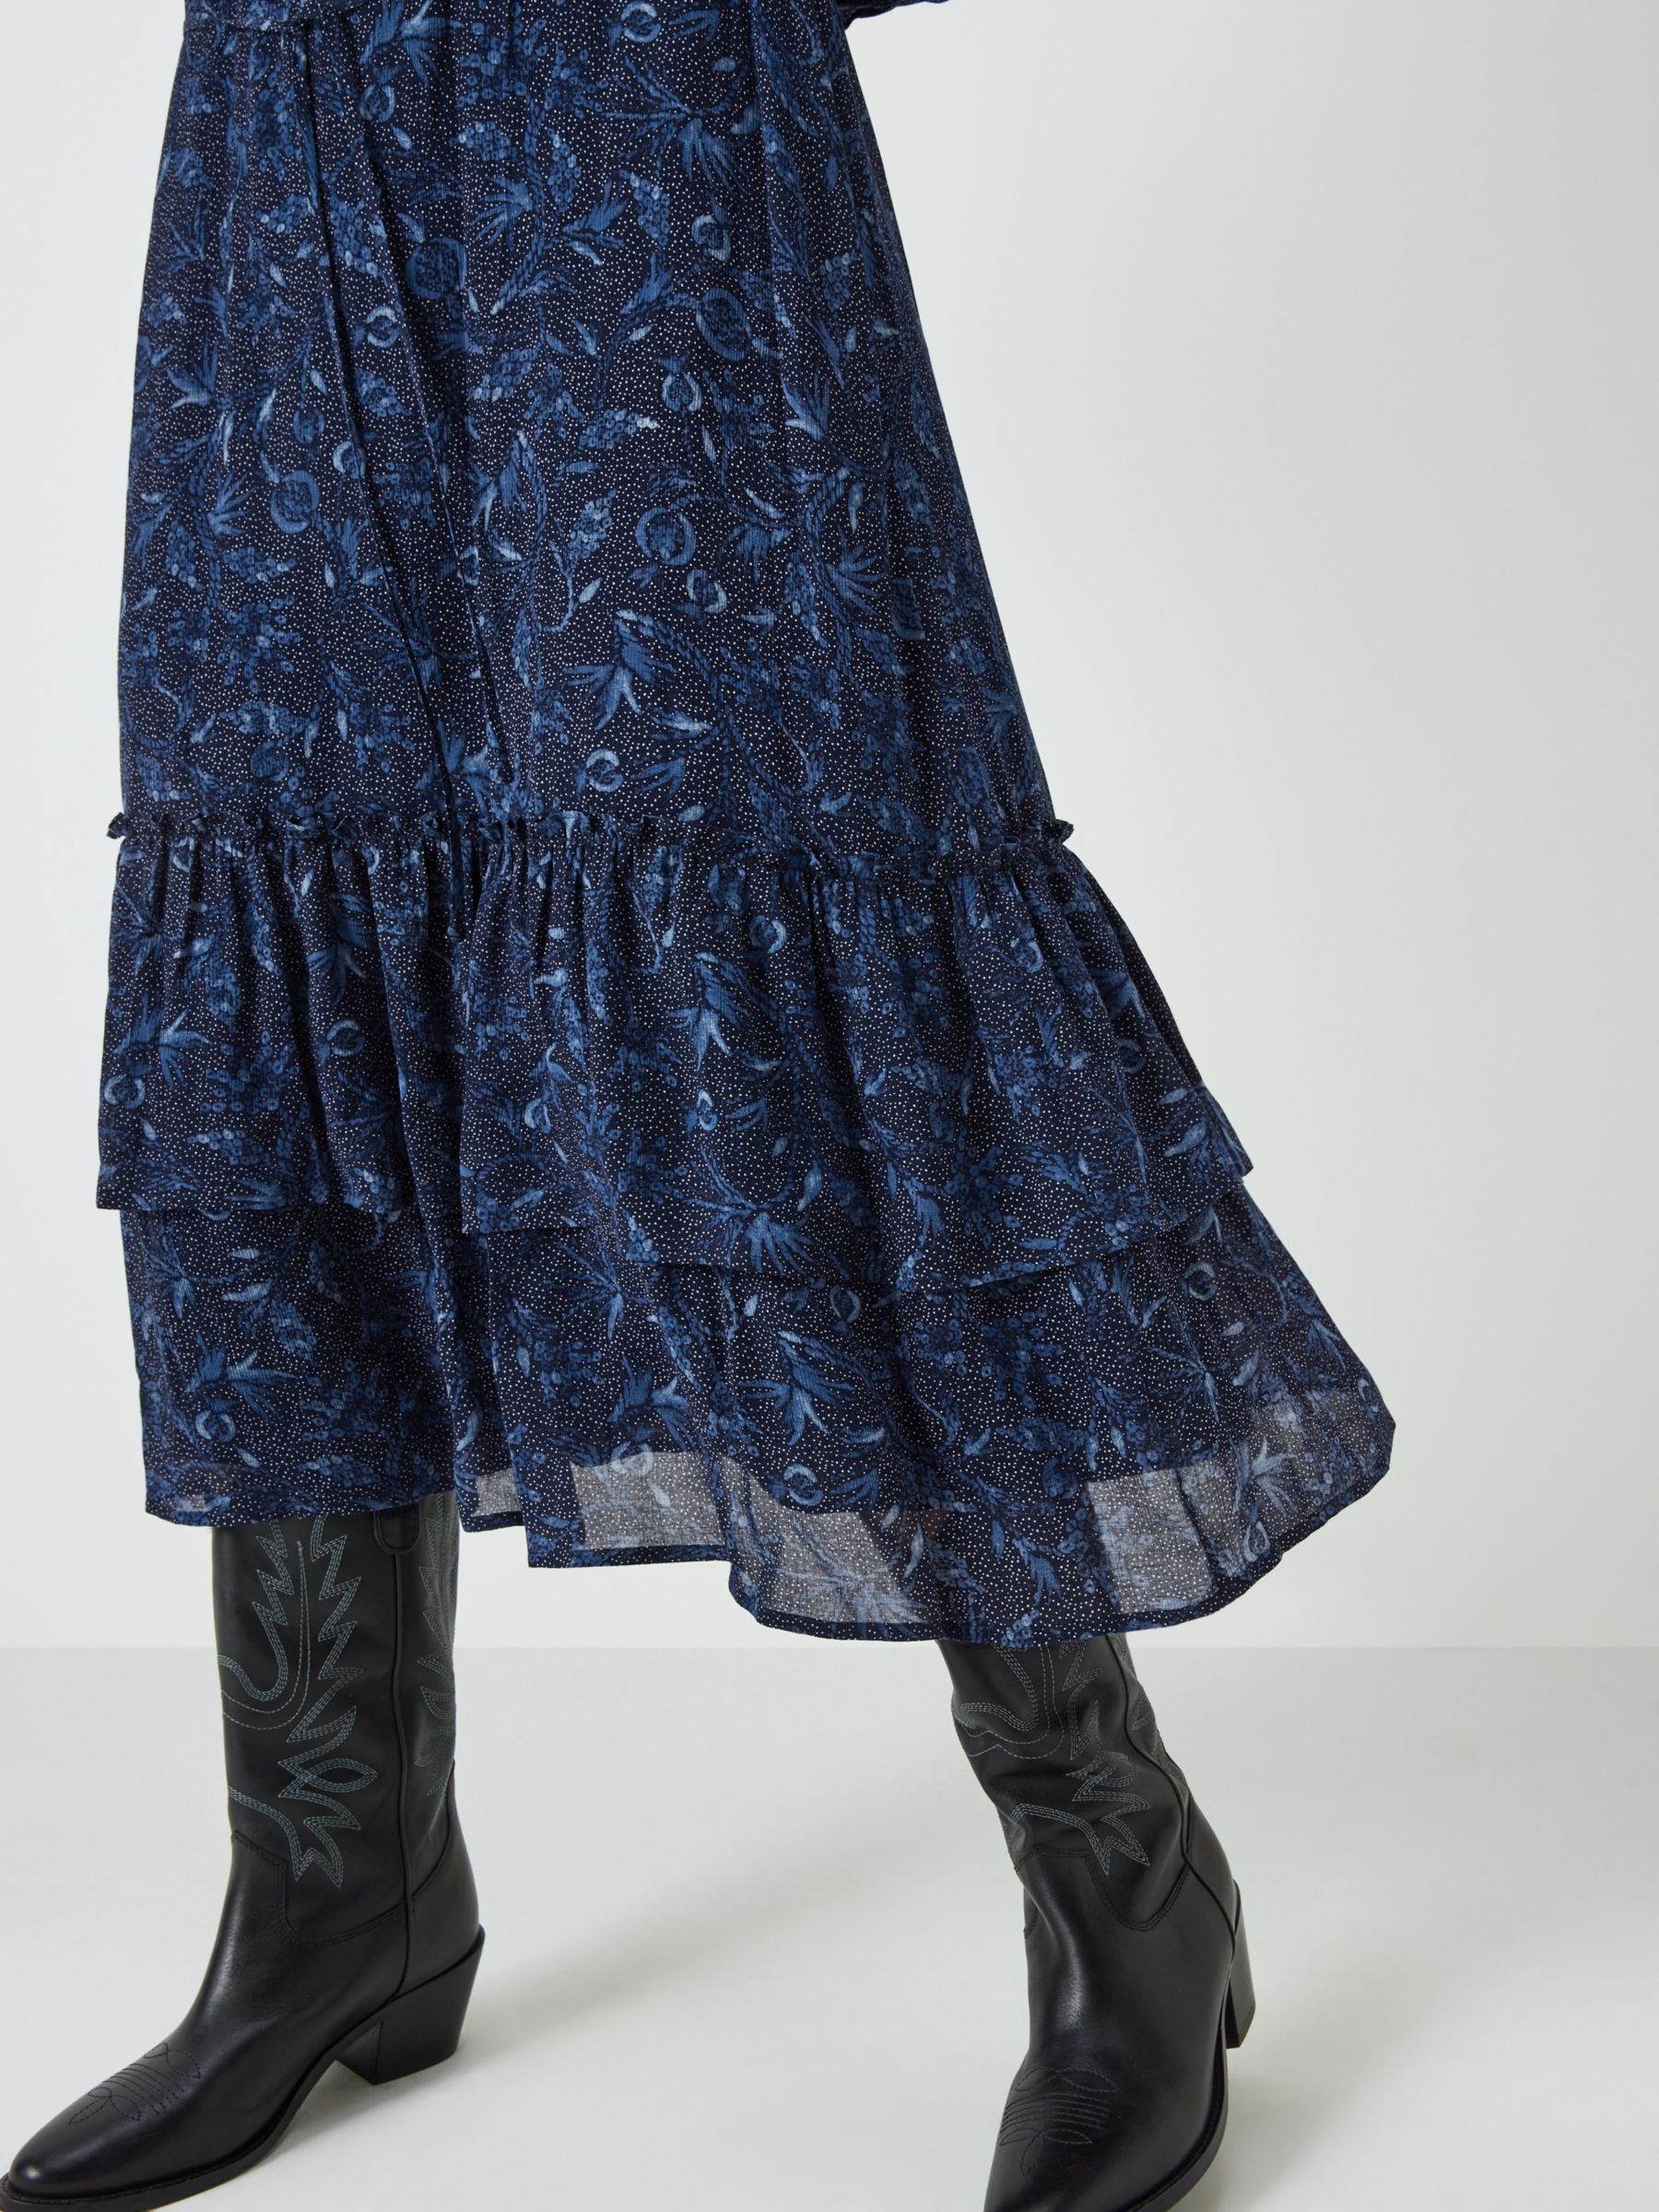 AND/OR Joanie Chiffon Floral Midi Dress, Blue at John Lewis & Partners